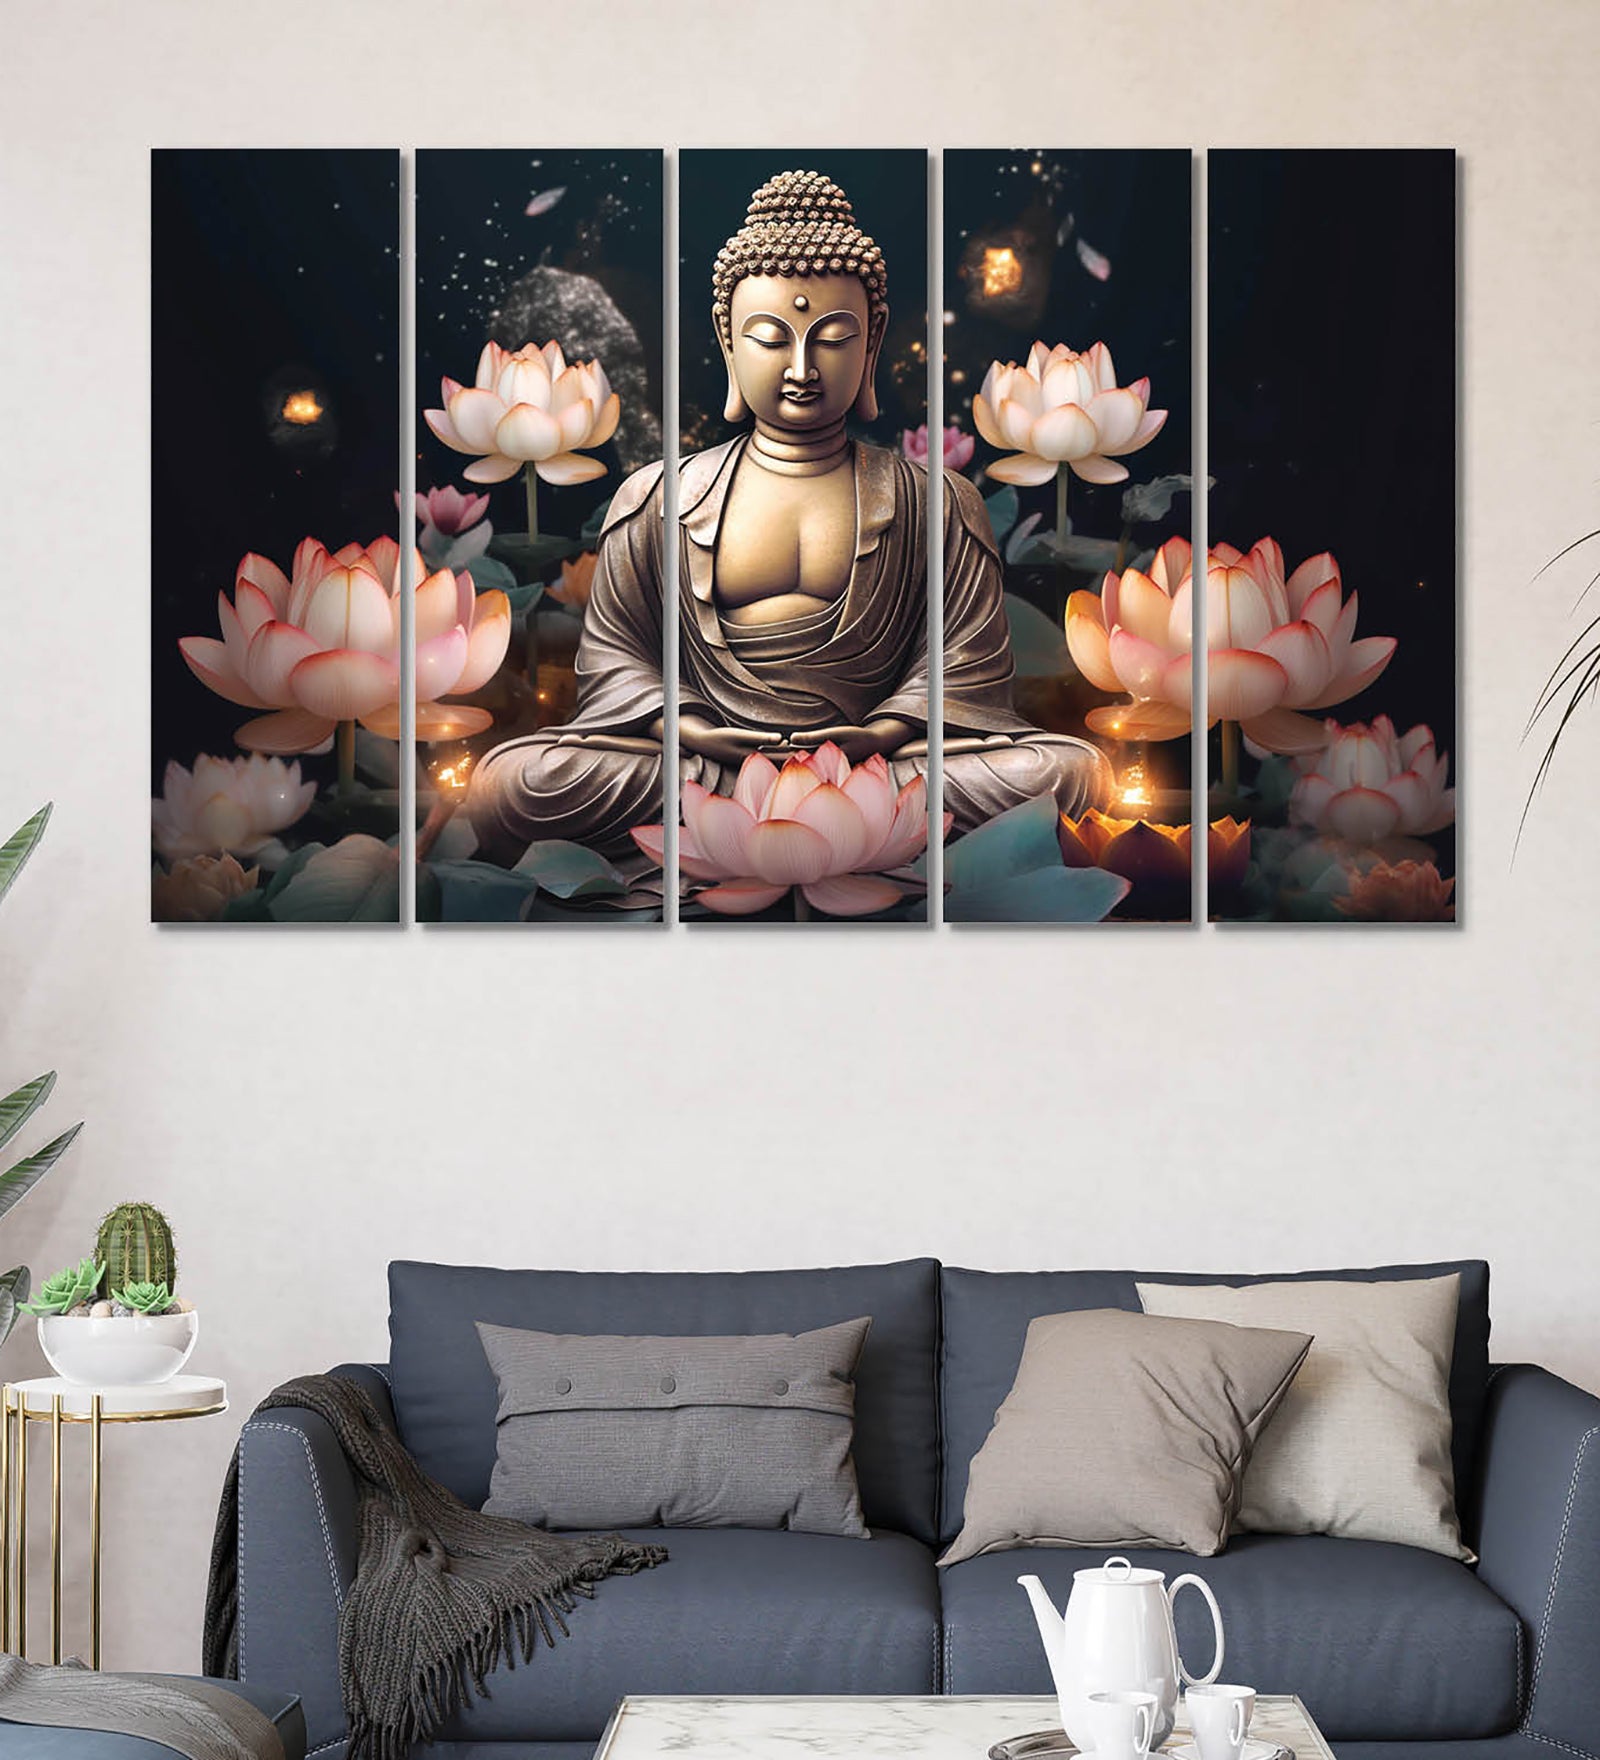 Large Canvas Painting for Wall Decoration Picture Split Panels Art Decor Set of 5 Canvas Paintings in Living Room Bedroom Hotel Office, Size 16 x 9.6 inches, 5 Frames